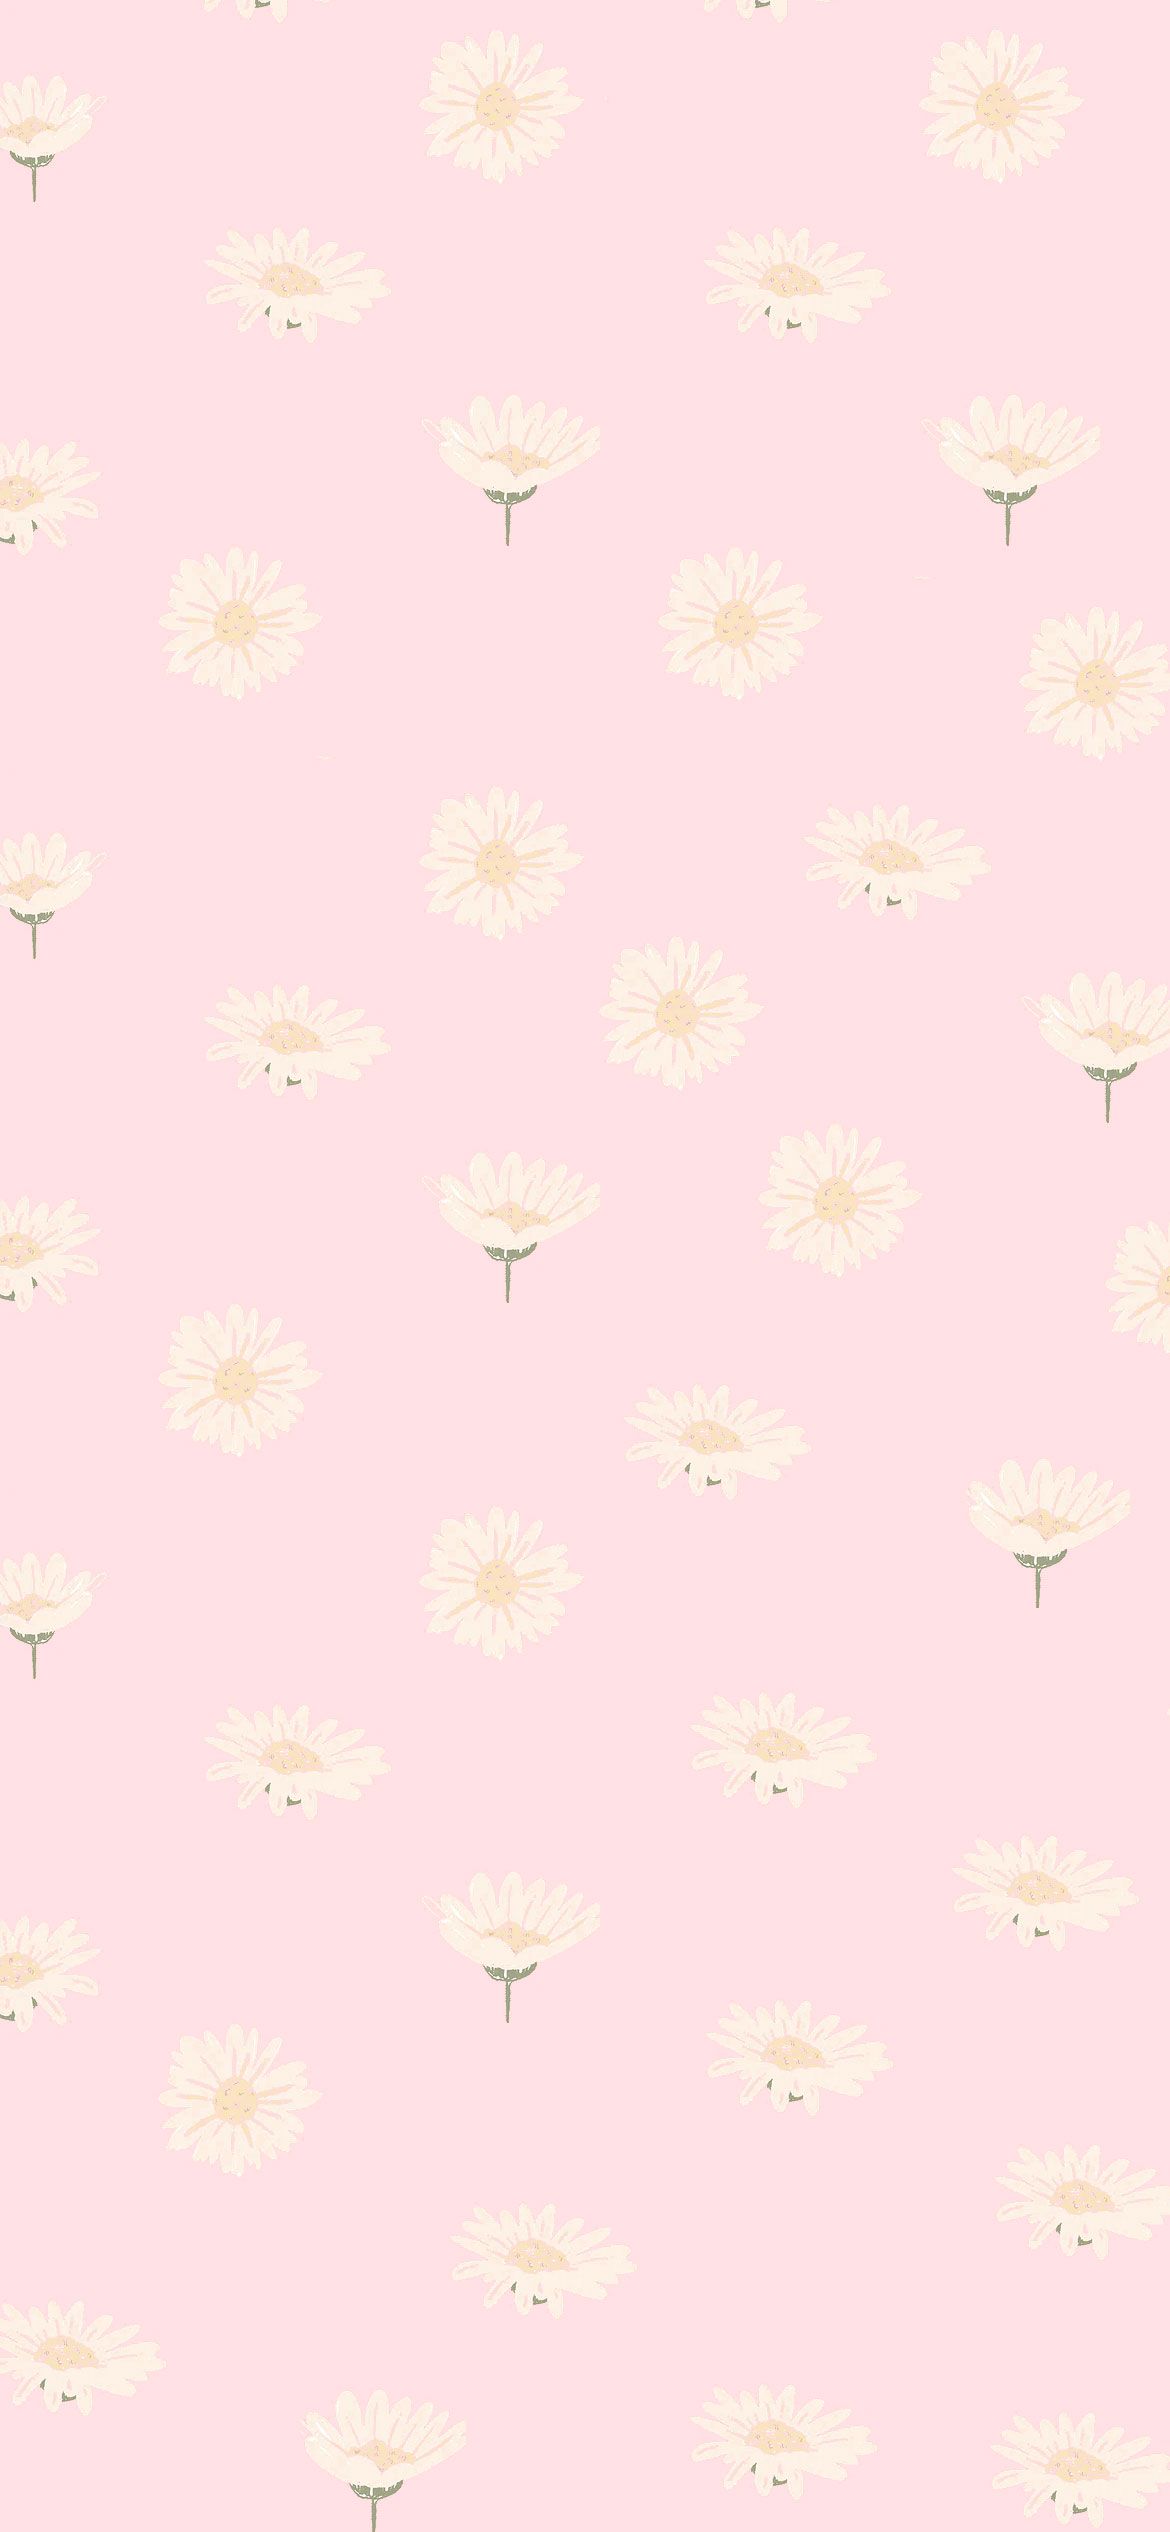 A pink background with white flowers - Cute pink, pink phone, pink, cute iPhone, daisy, cute, pretty